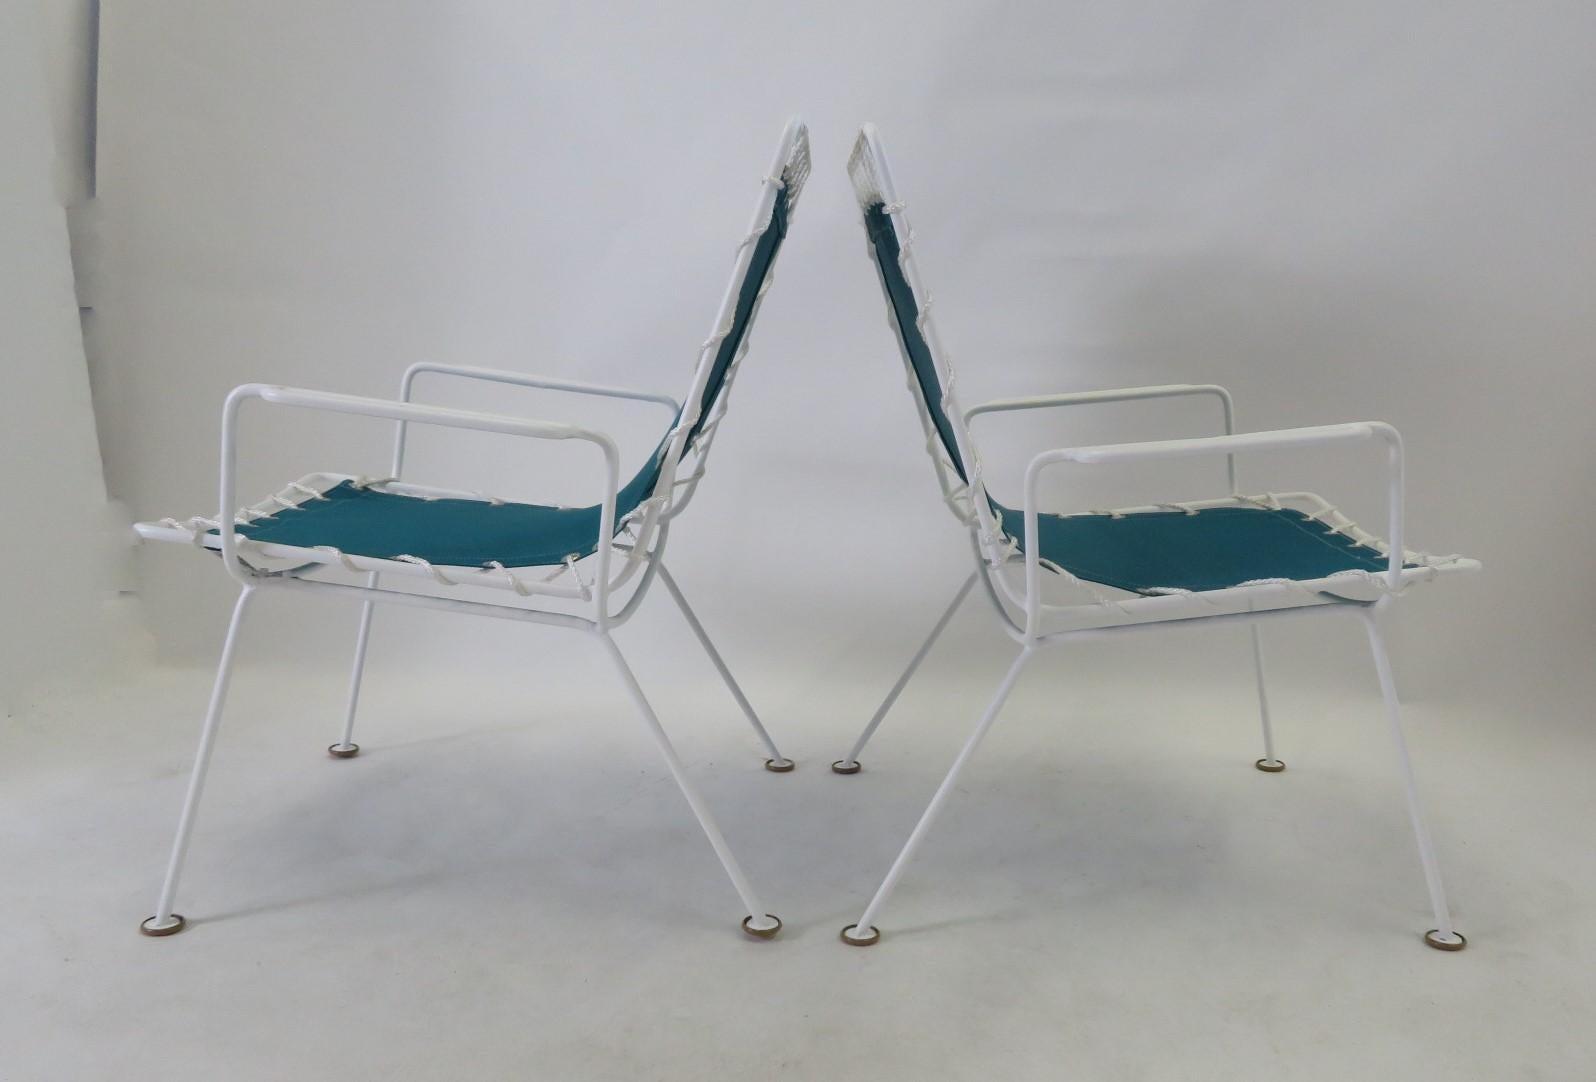 Mid-20th Century Pipsan Saarinen Swanson Sol Air Set of 4 Outdoor Chairs 1950s Ficks Reed Co.